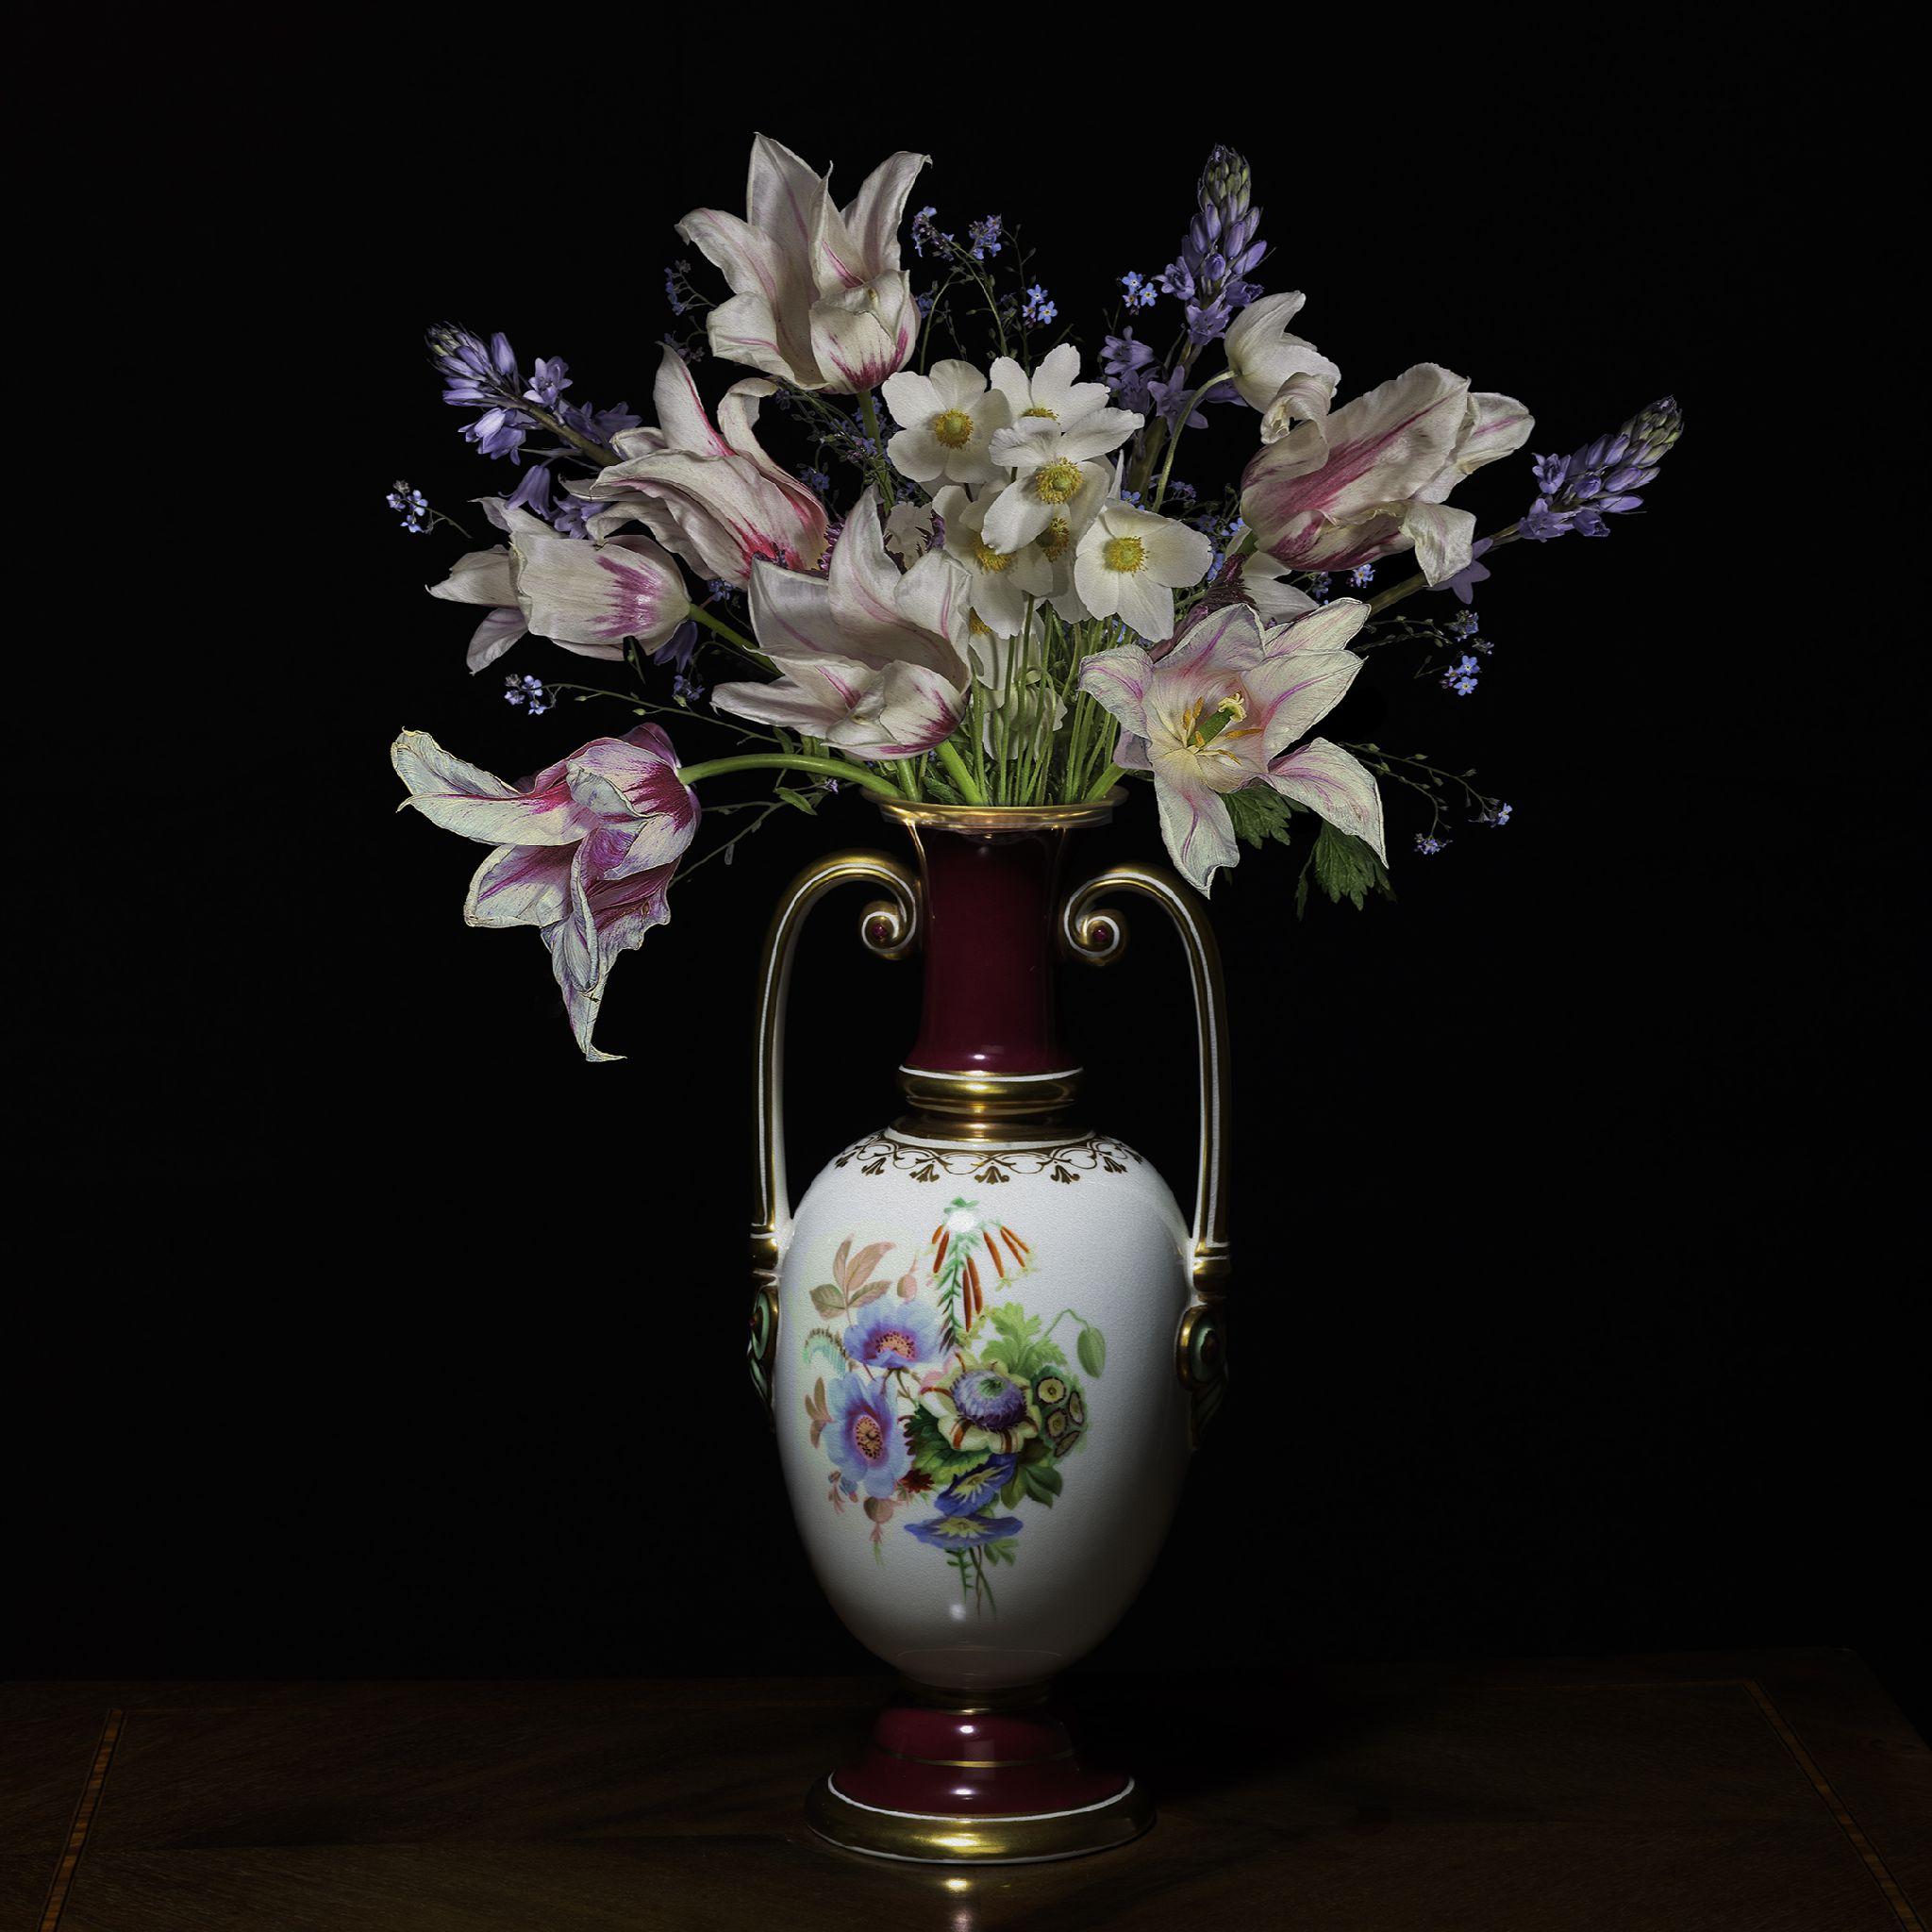 Spring Bouquet in a Ceramic Vase - Photograph by T.M. Glass